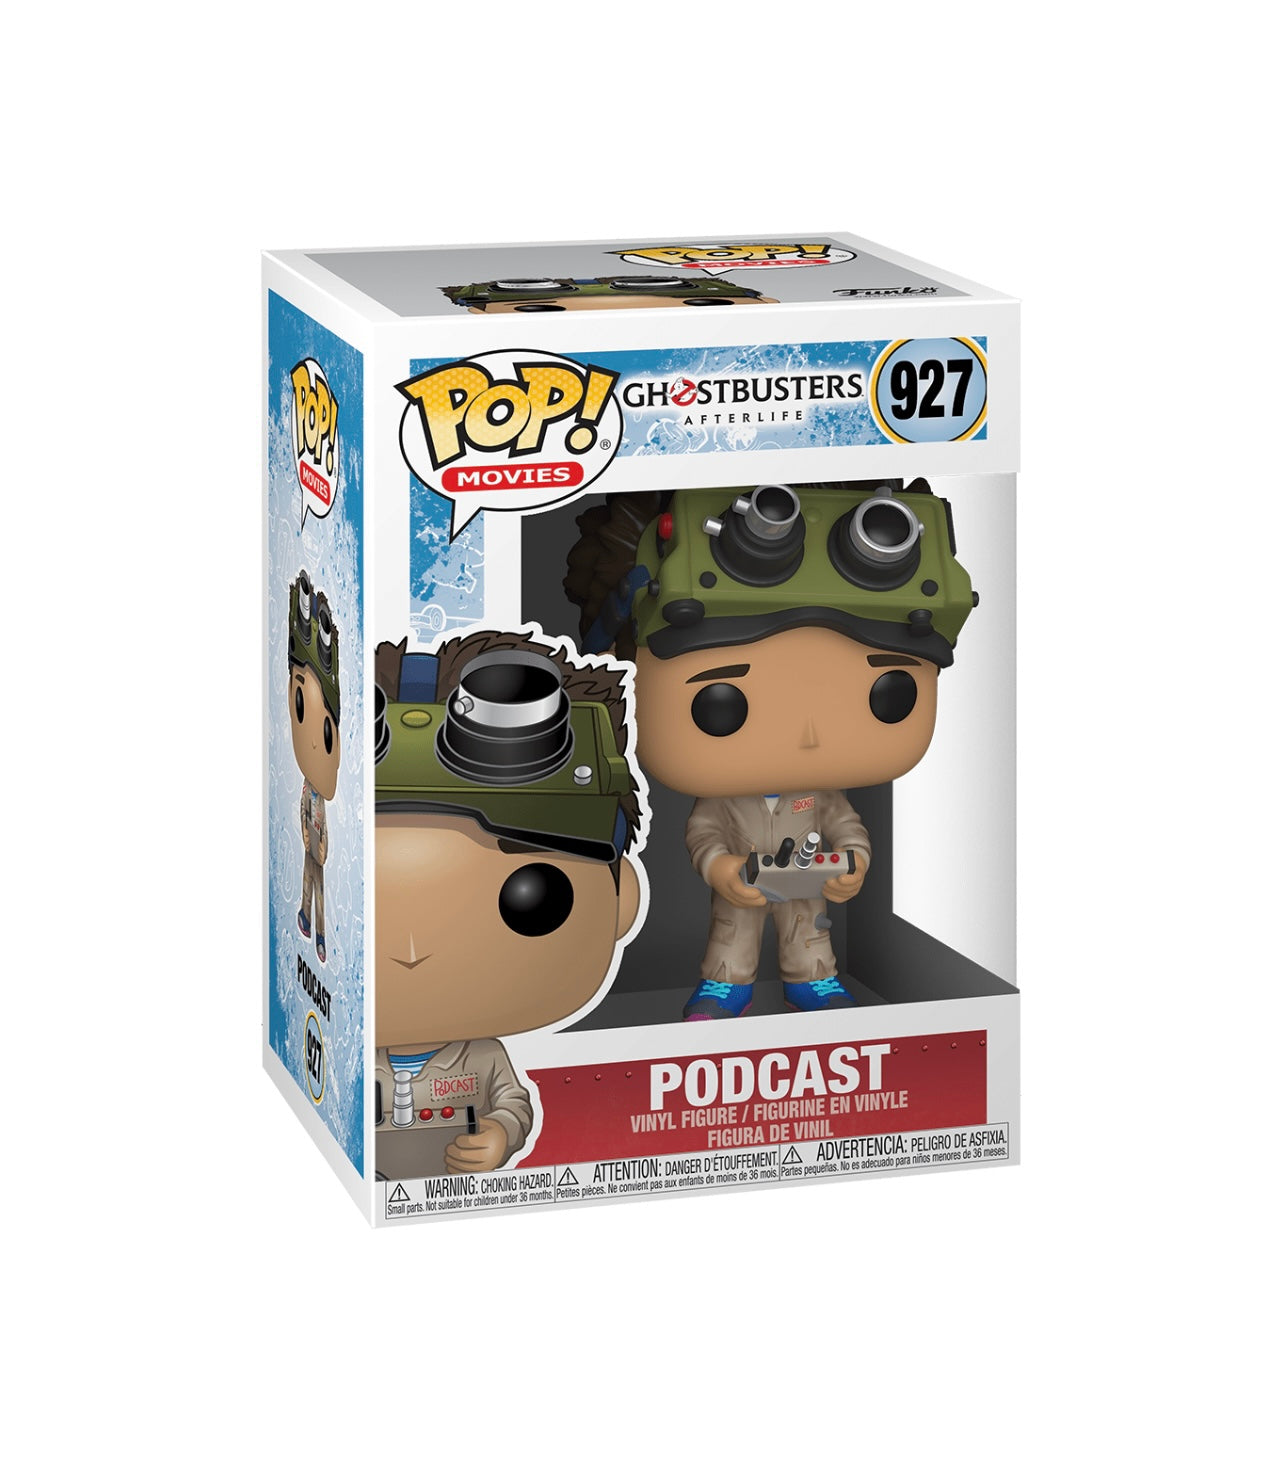 POP! Movies Ghostbusters Podcast #927